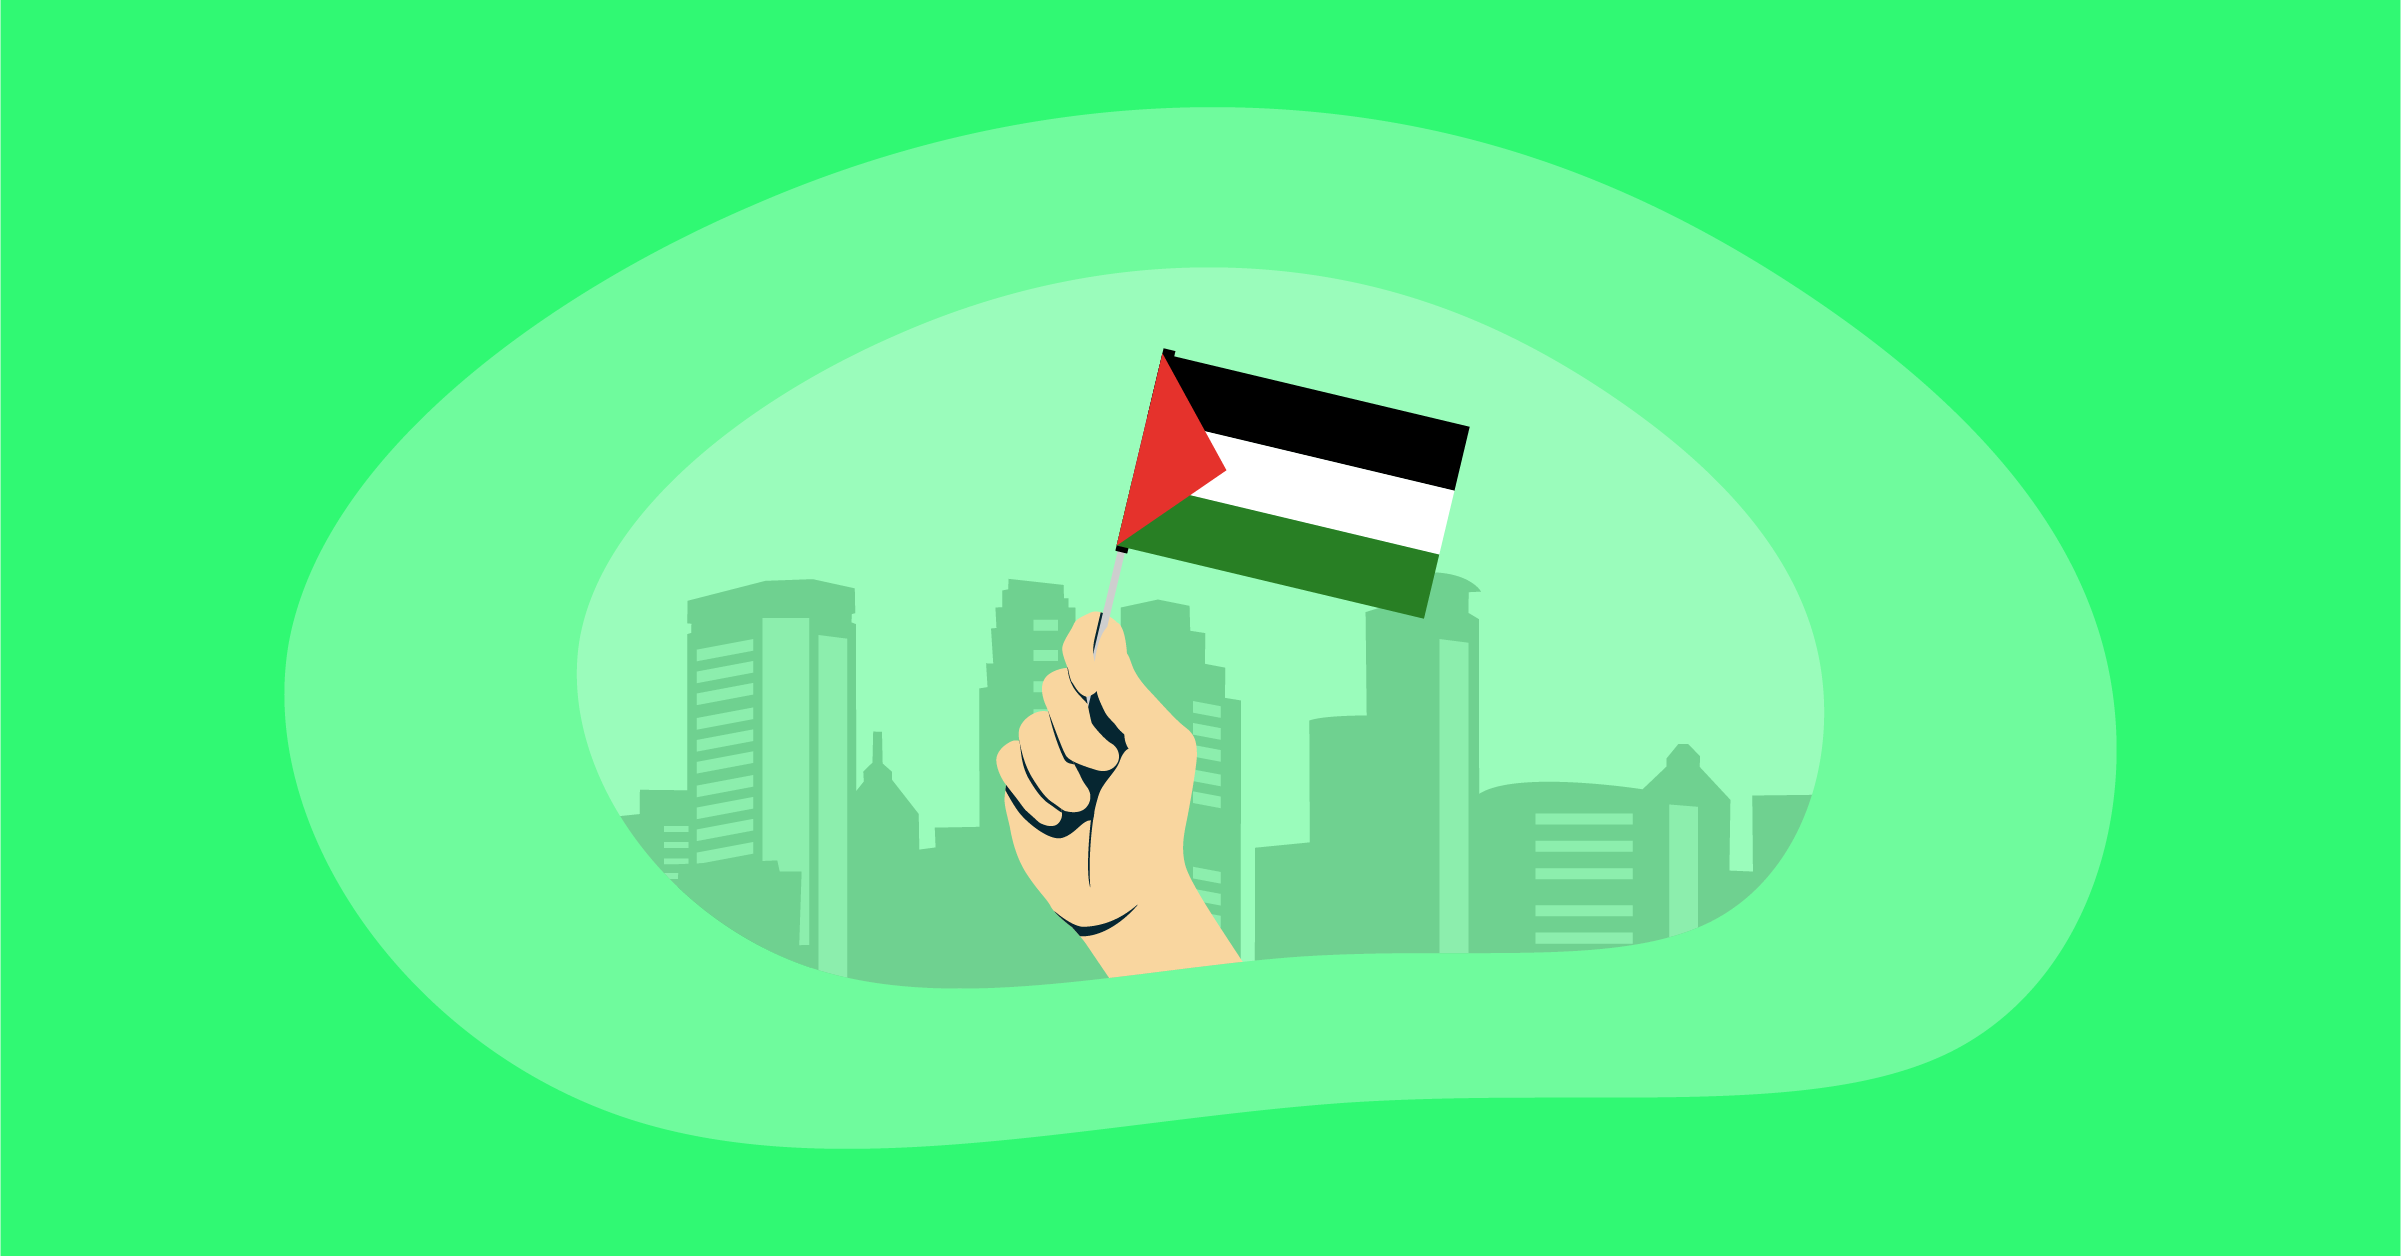 Illustration of a hand holding the flag of Palestine